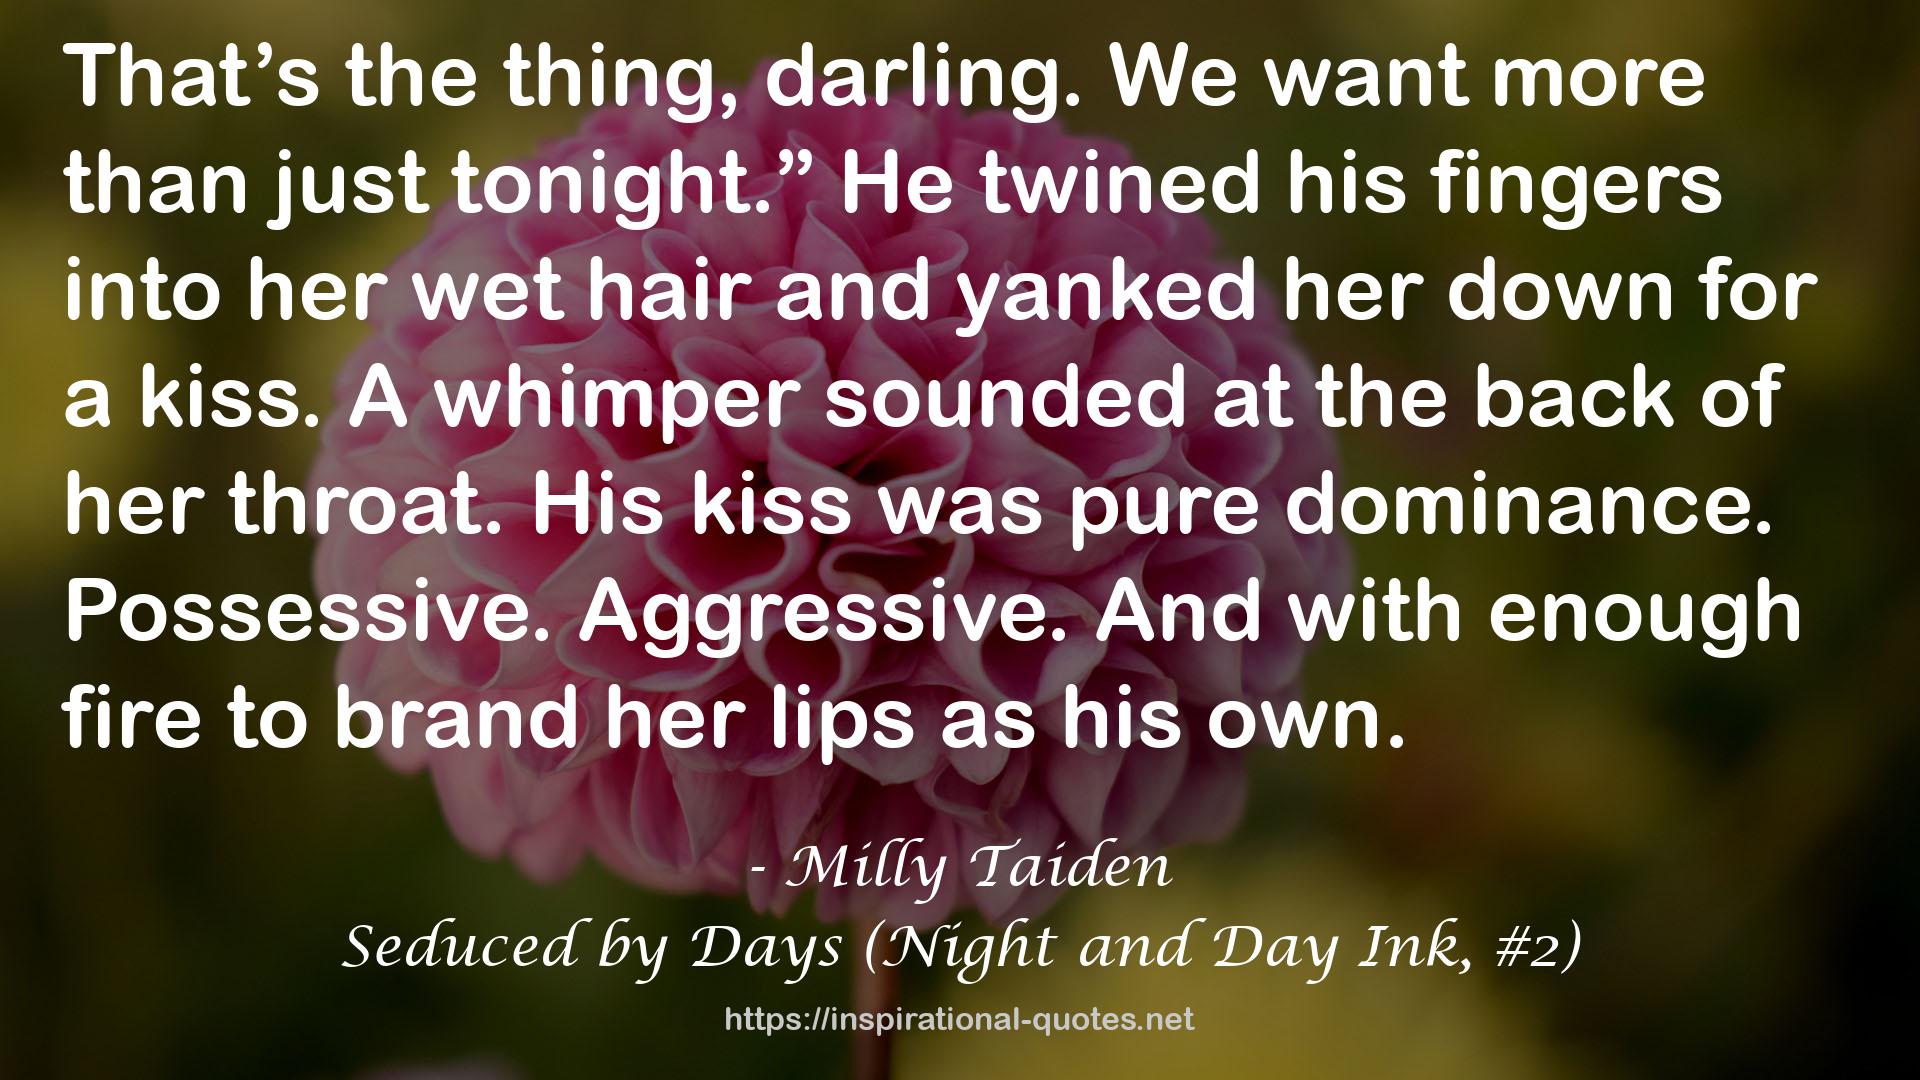 Seduced by Days (Night and Day Ink, #2) QUOTES